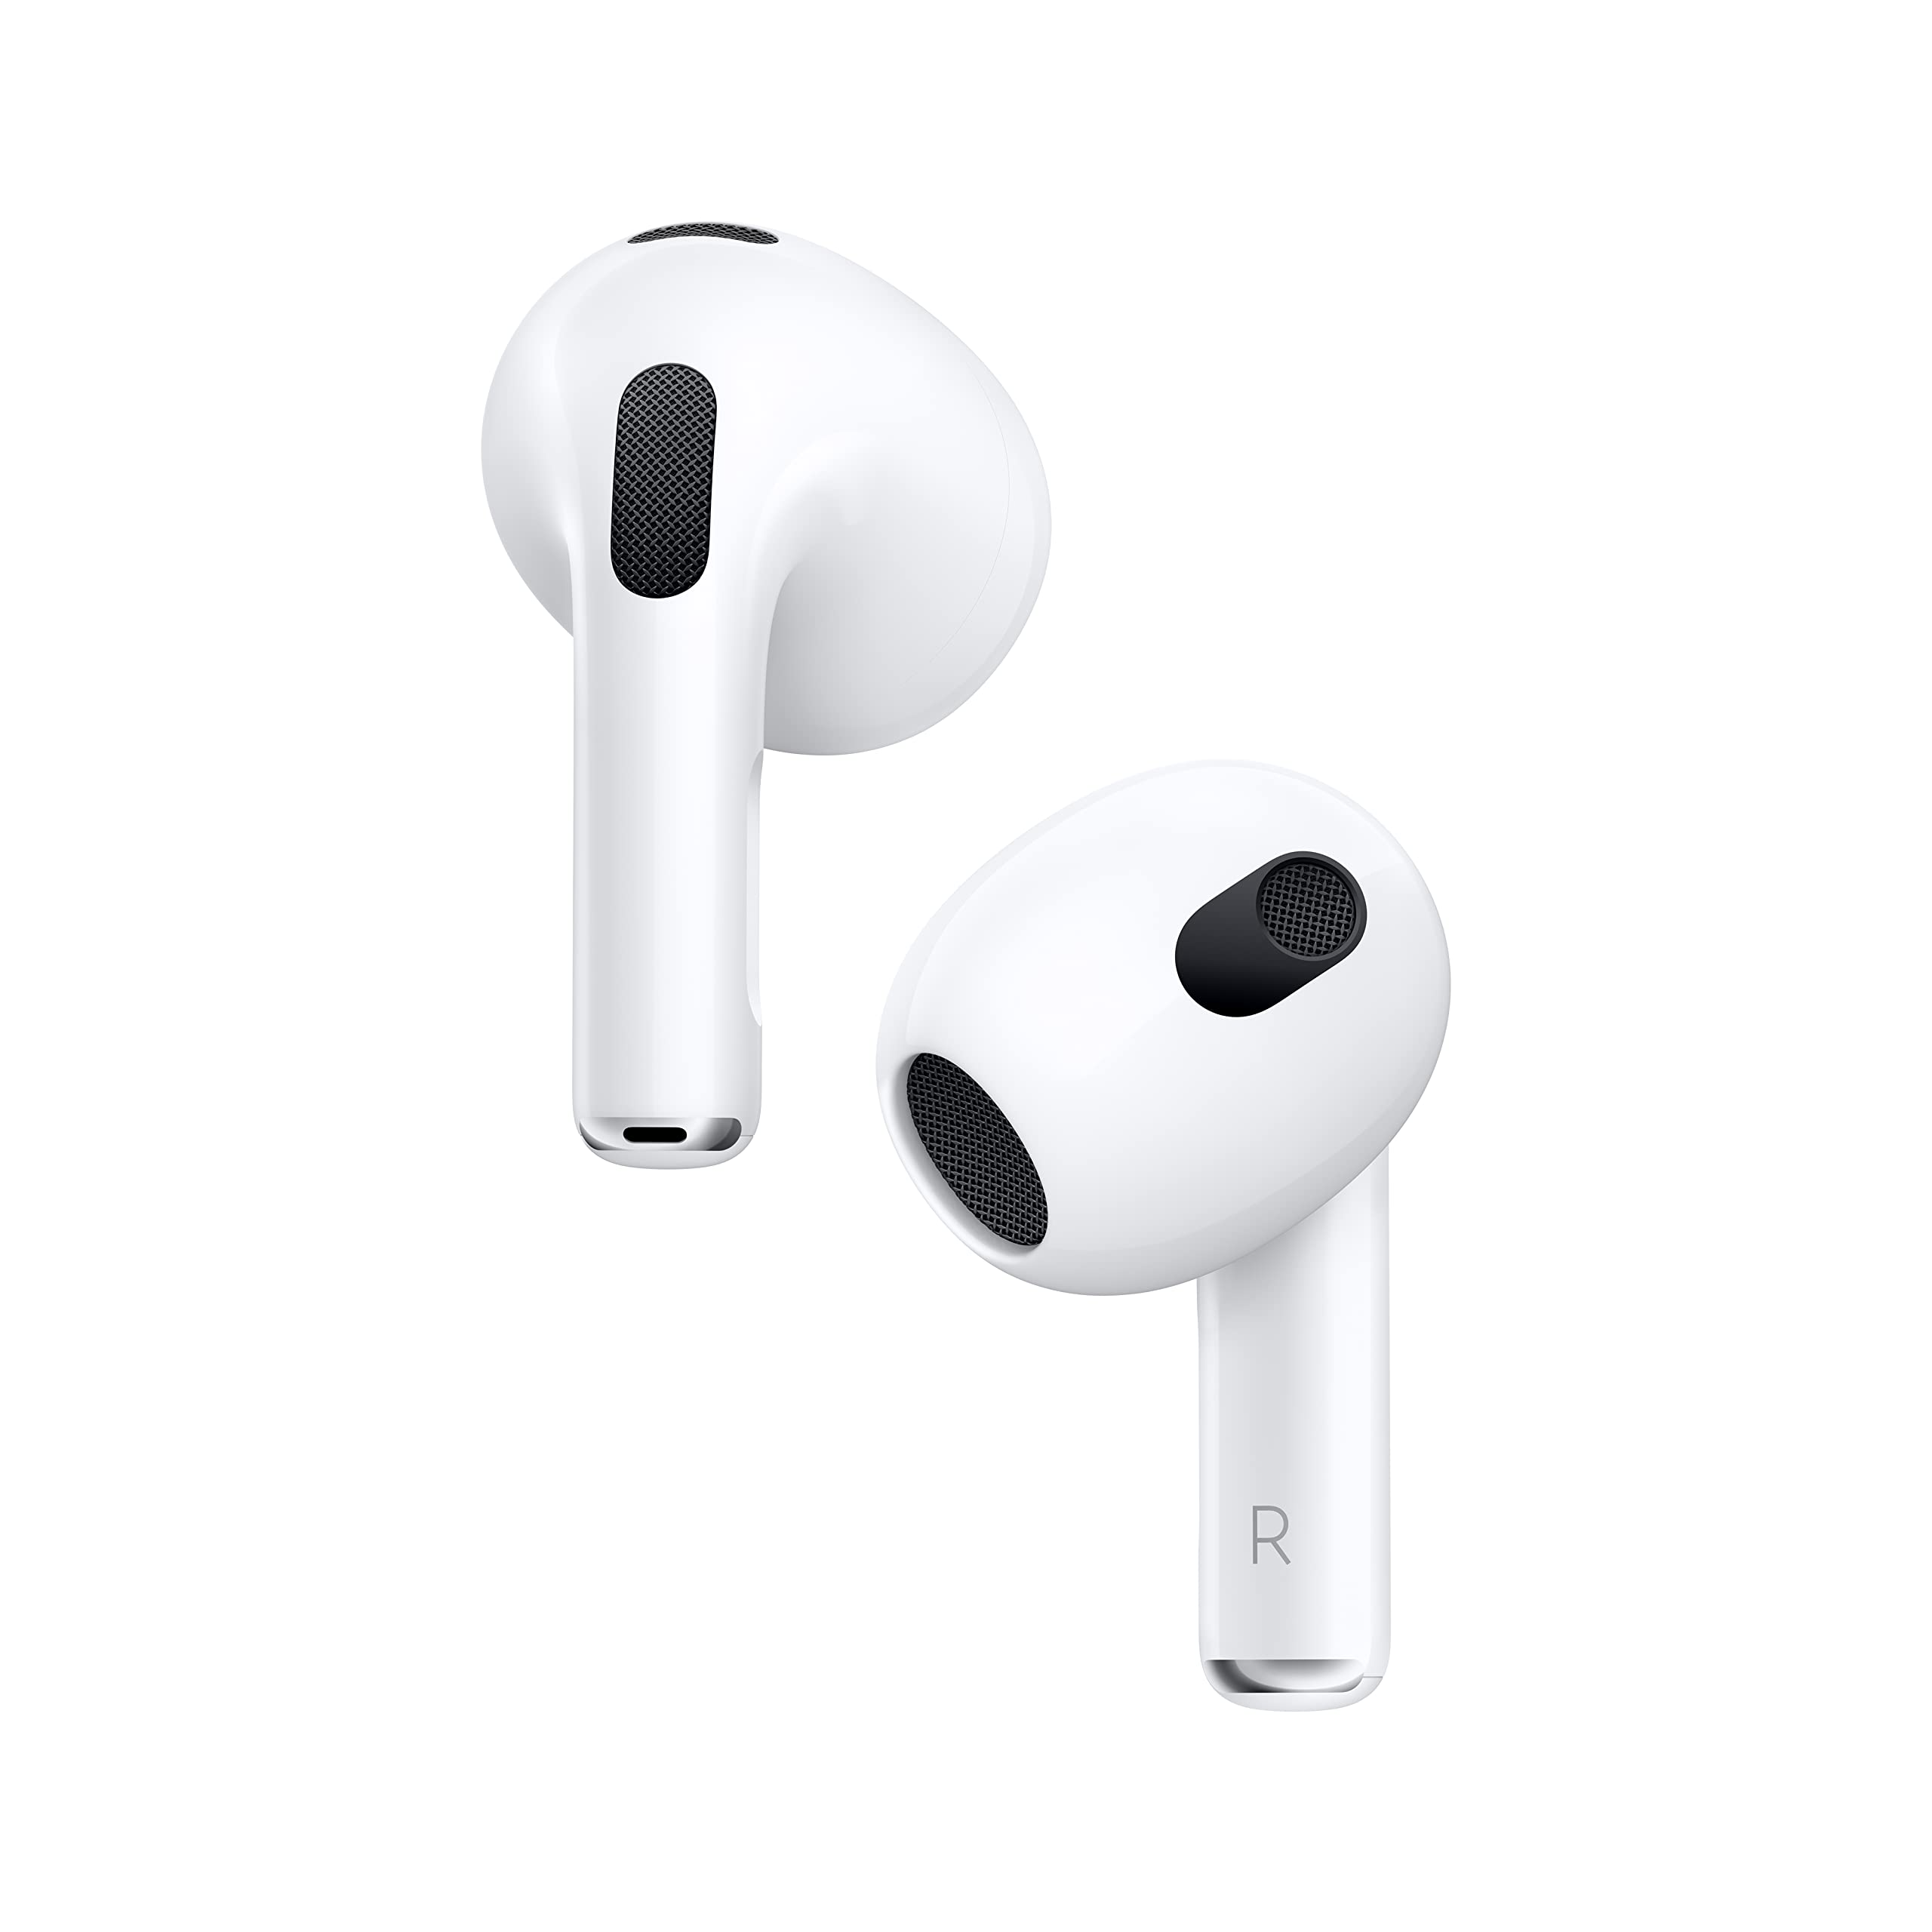 Say goodbye to tangled wires and hello to the ultimate listening experience with these wireless earbuds! Designed with both style and functionality in mind, these earbuds provide high quality sound and a comfortable fit. Don\'t miss out on the convenience of wireless listening!